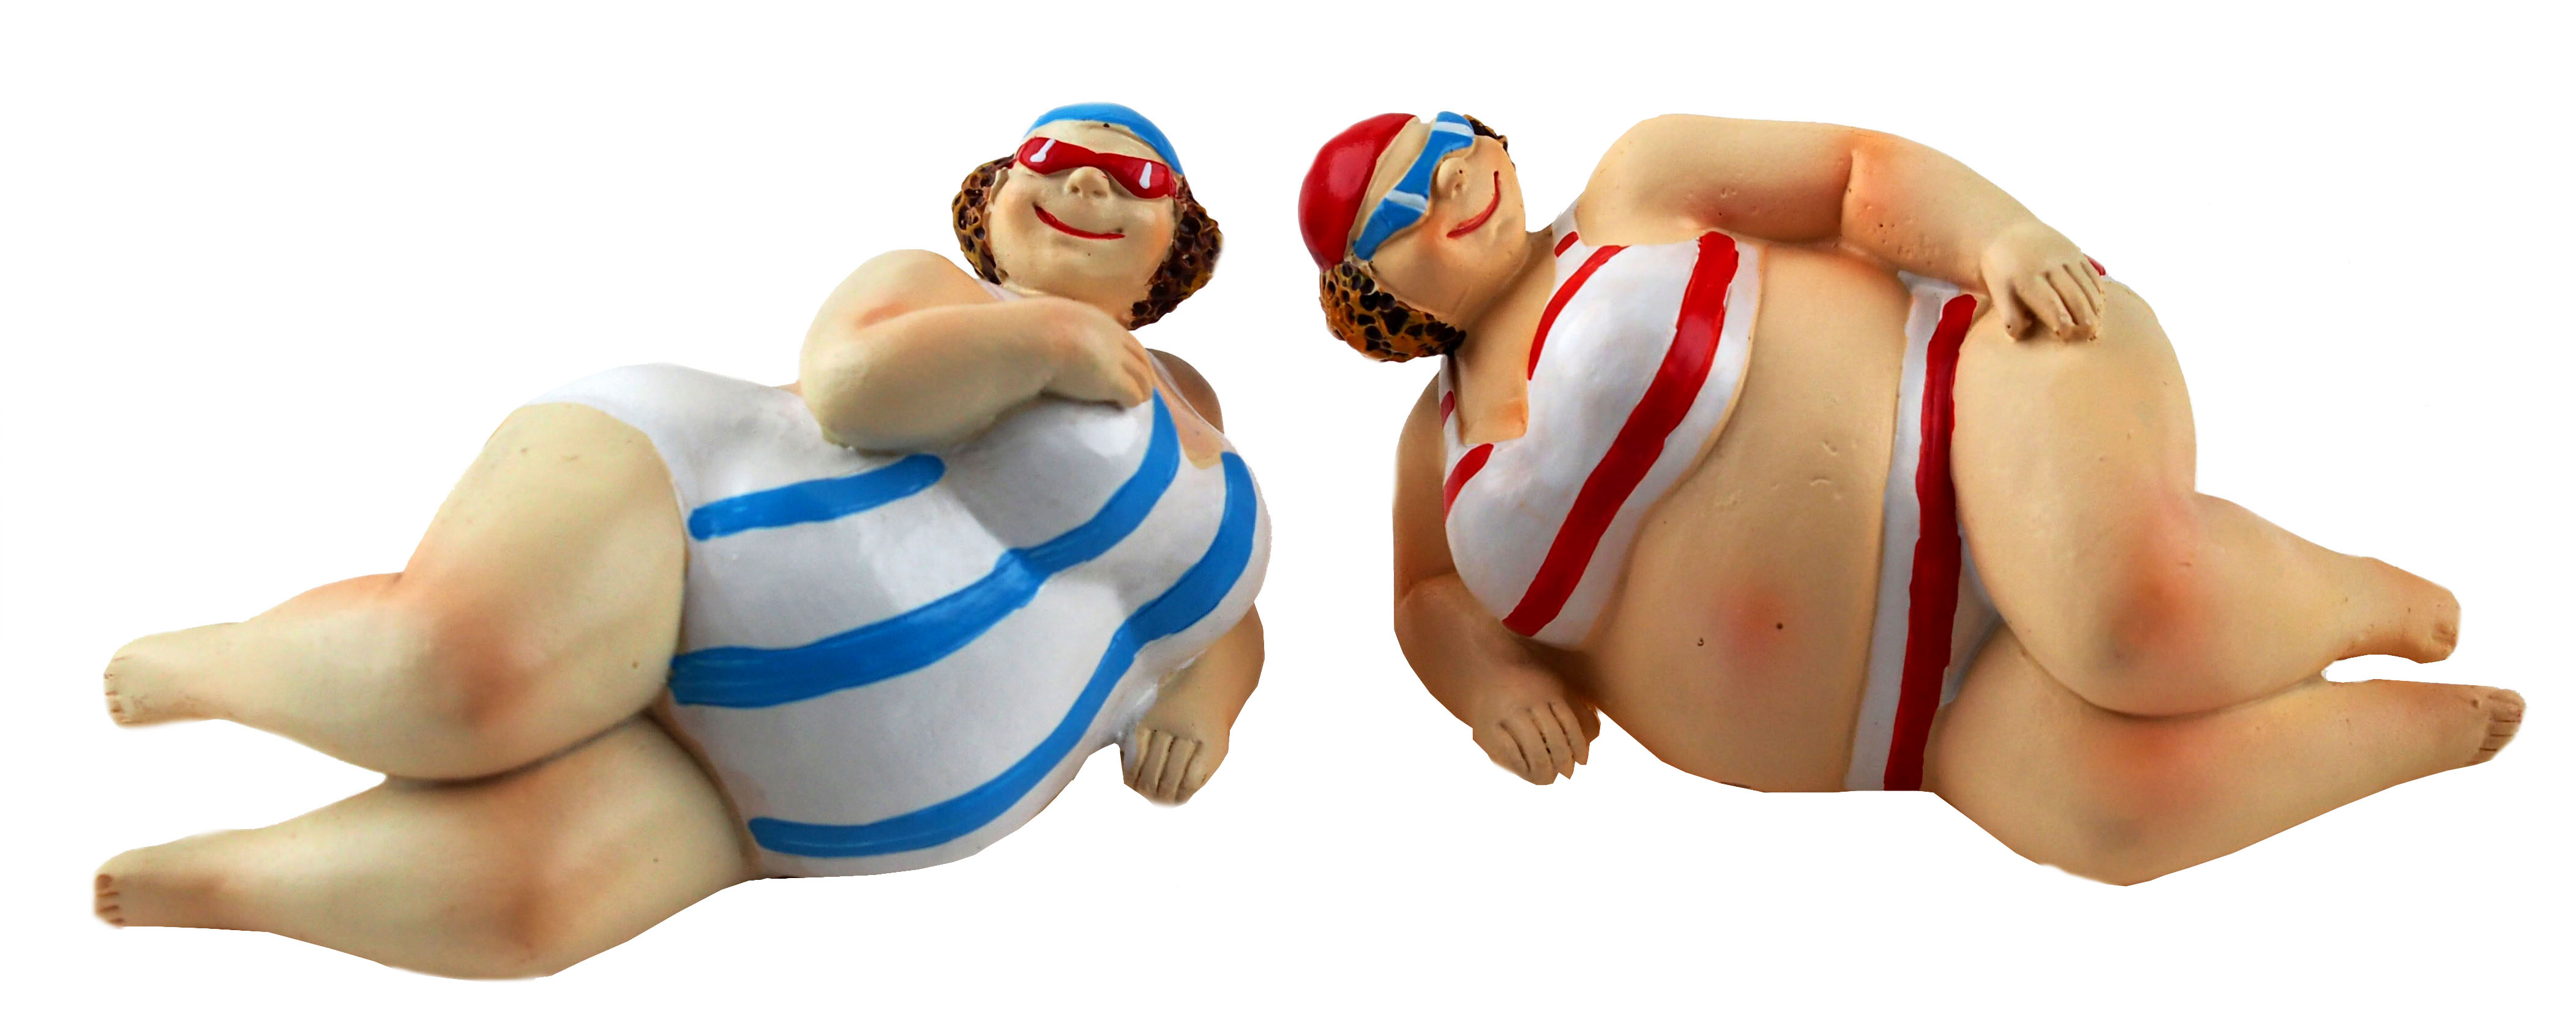 Laying Curvy Lady / Swim Suits Beach Dippers Novelty Ornaments (Set of 2)